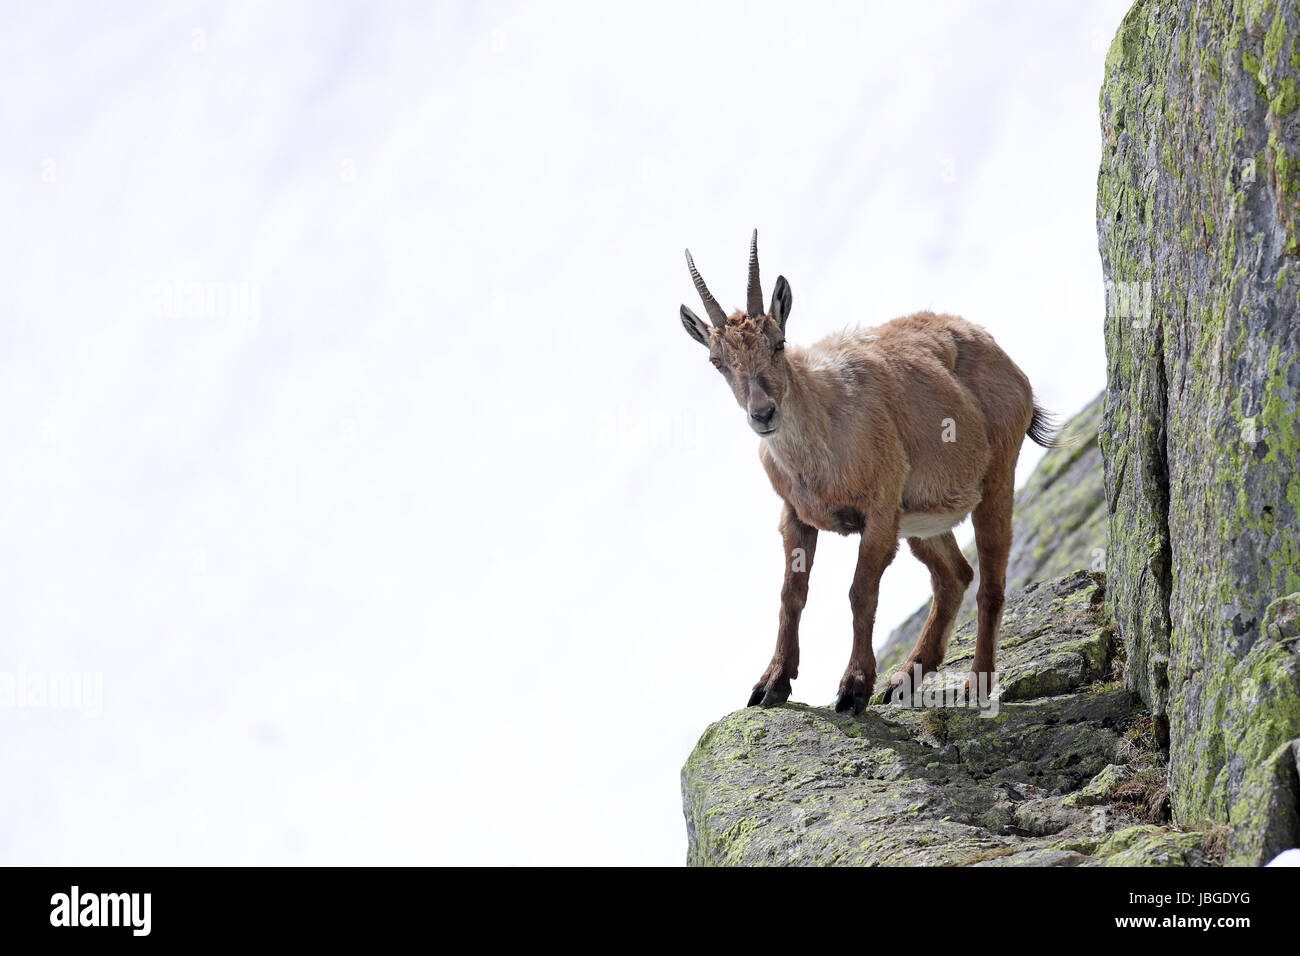 Ibex, Capra Ibex, perched on high mountain cliffs against a white snow background Stock Photo